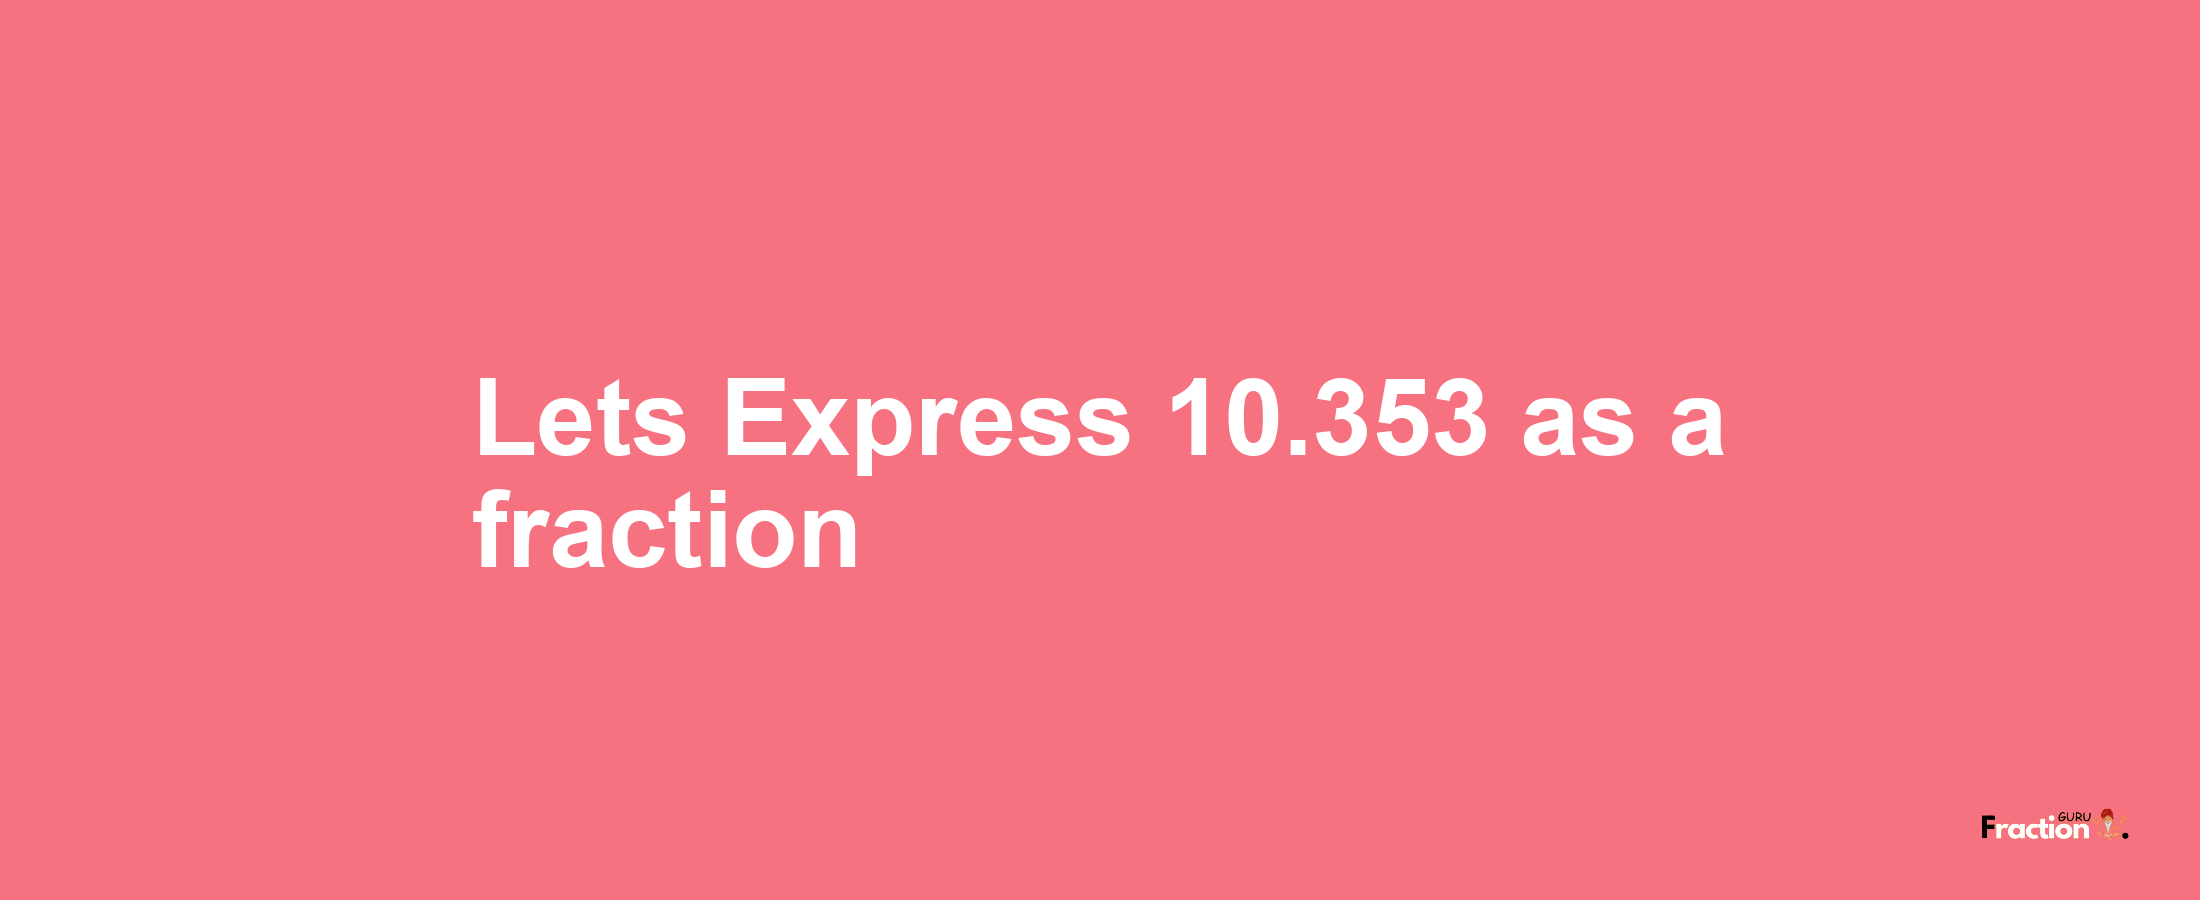 Lets Express 10.353 as afraction